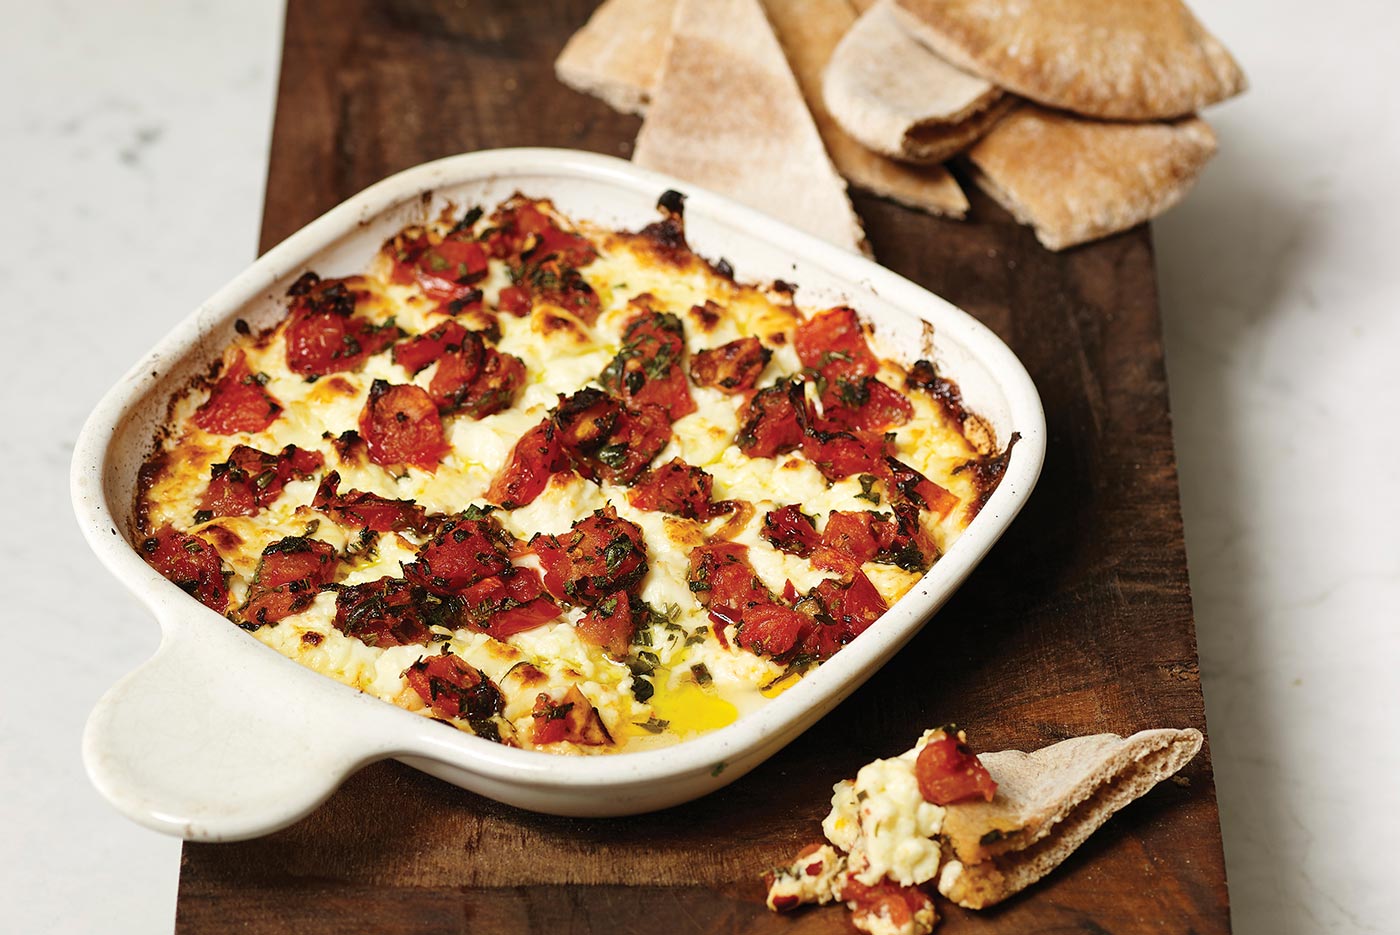 Broiled Feta with Roasted Tomatoes and Warm Pita Triangles